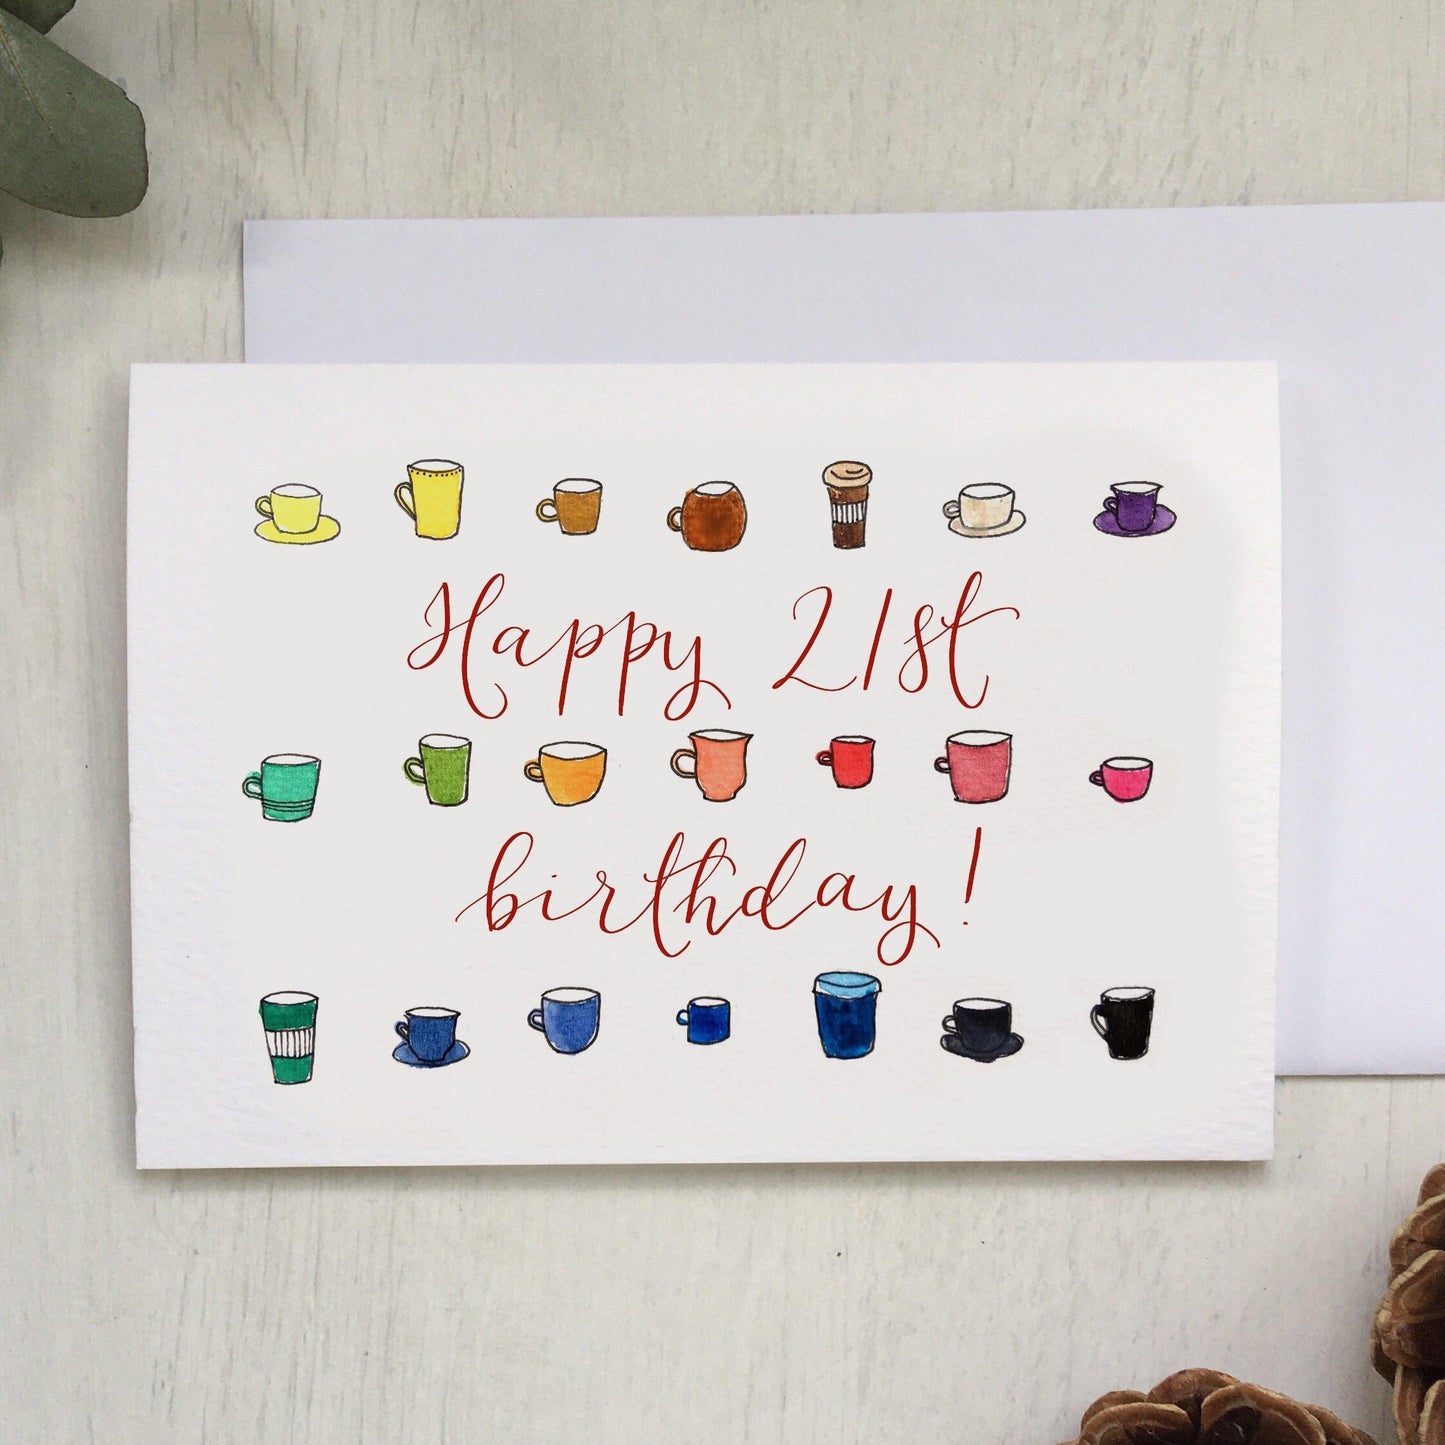 And Hope Designs Greeting & Note Cards 21st birthday mugs and cups card